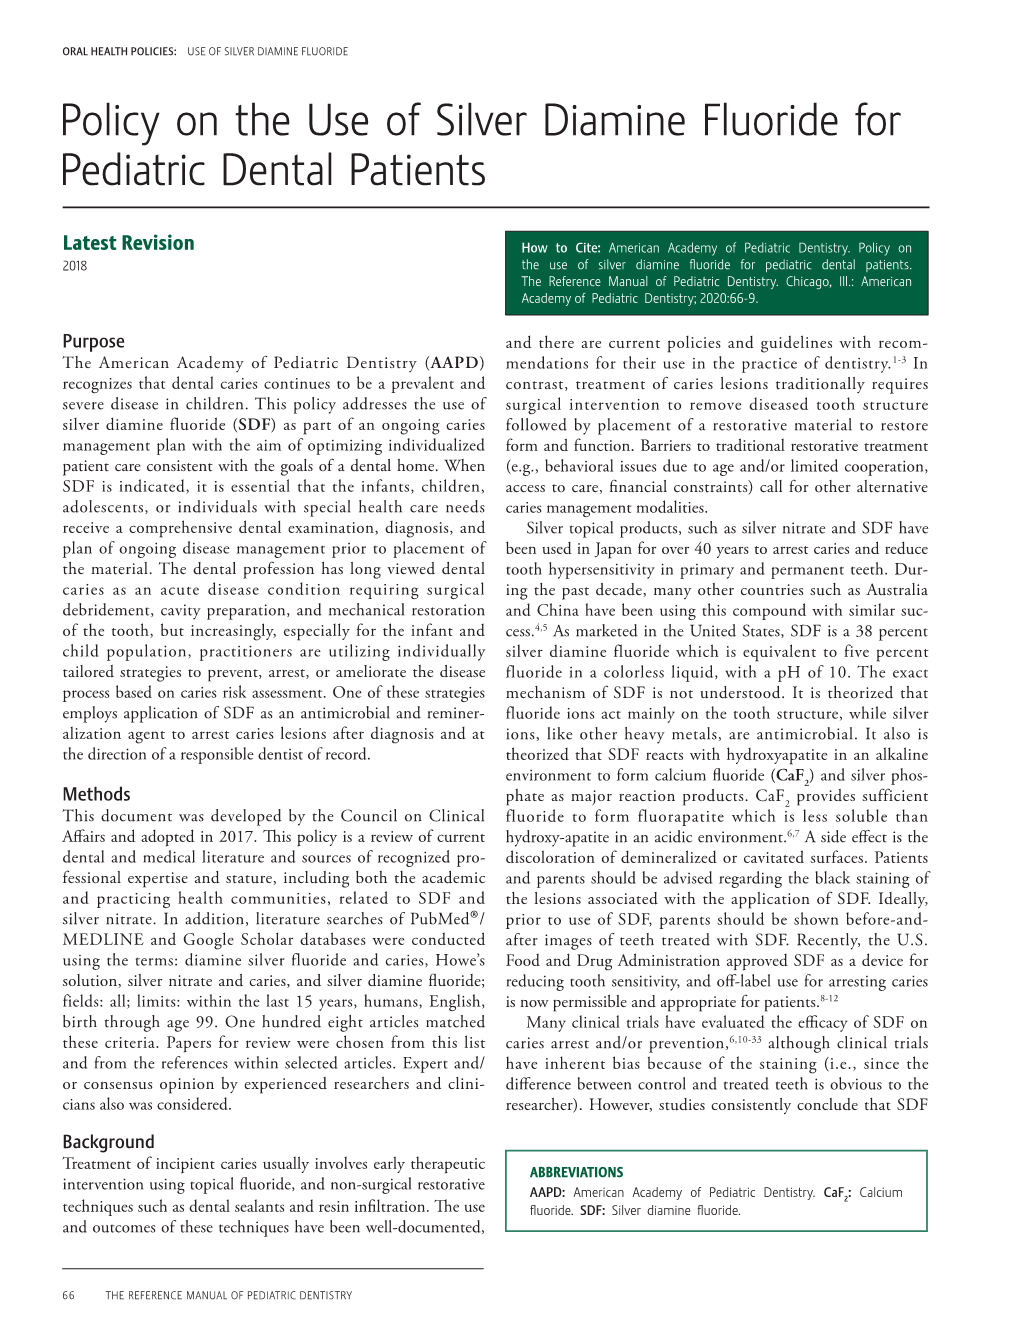 Policy on the Use of Silver Diamine Fluoride for Pediatric Dental Patients